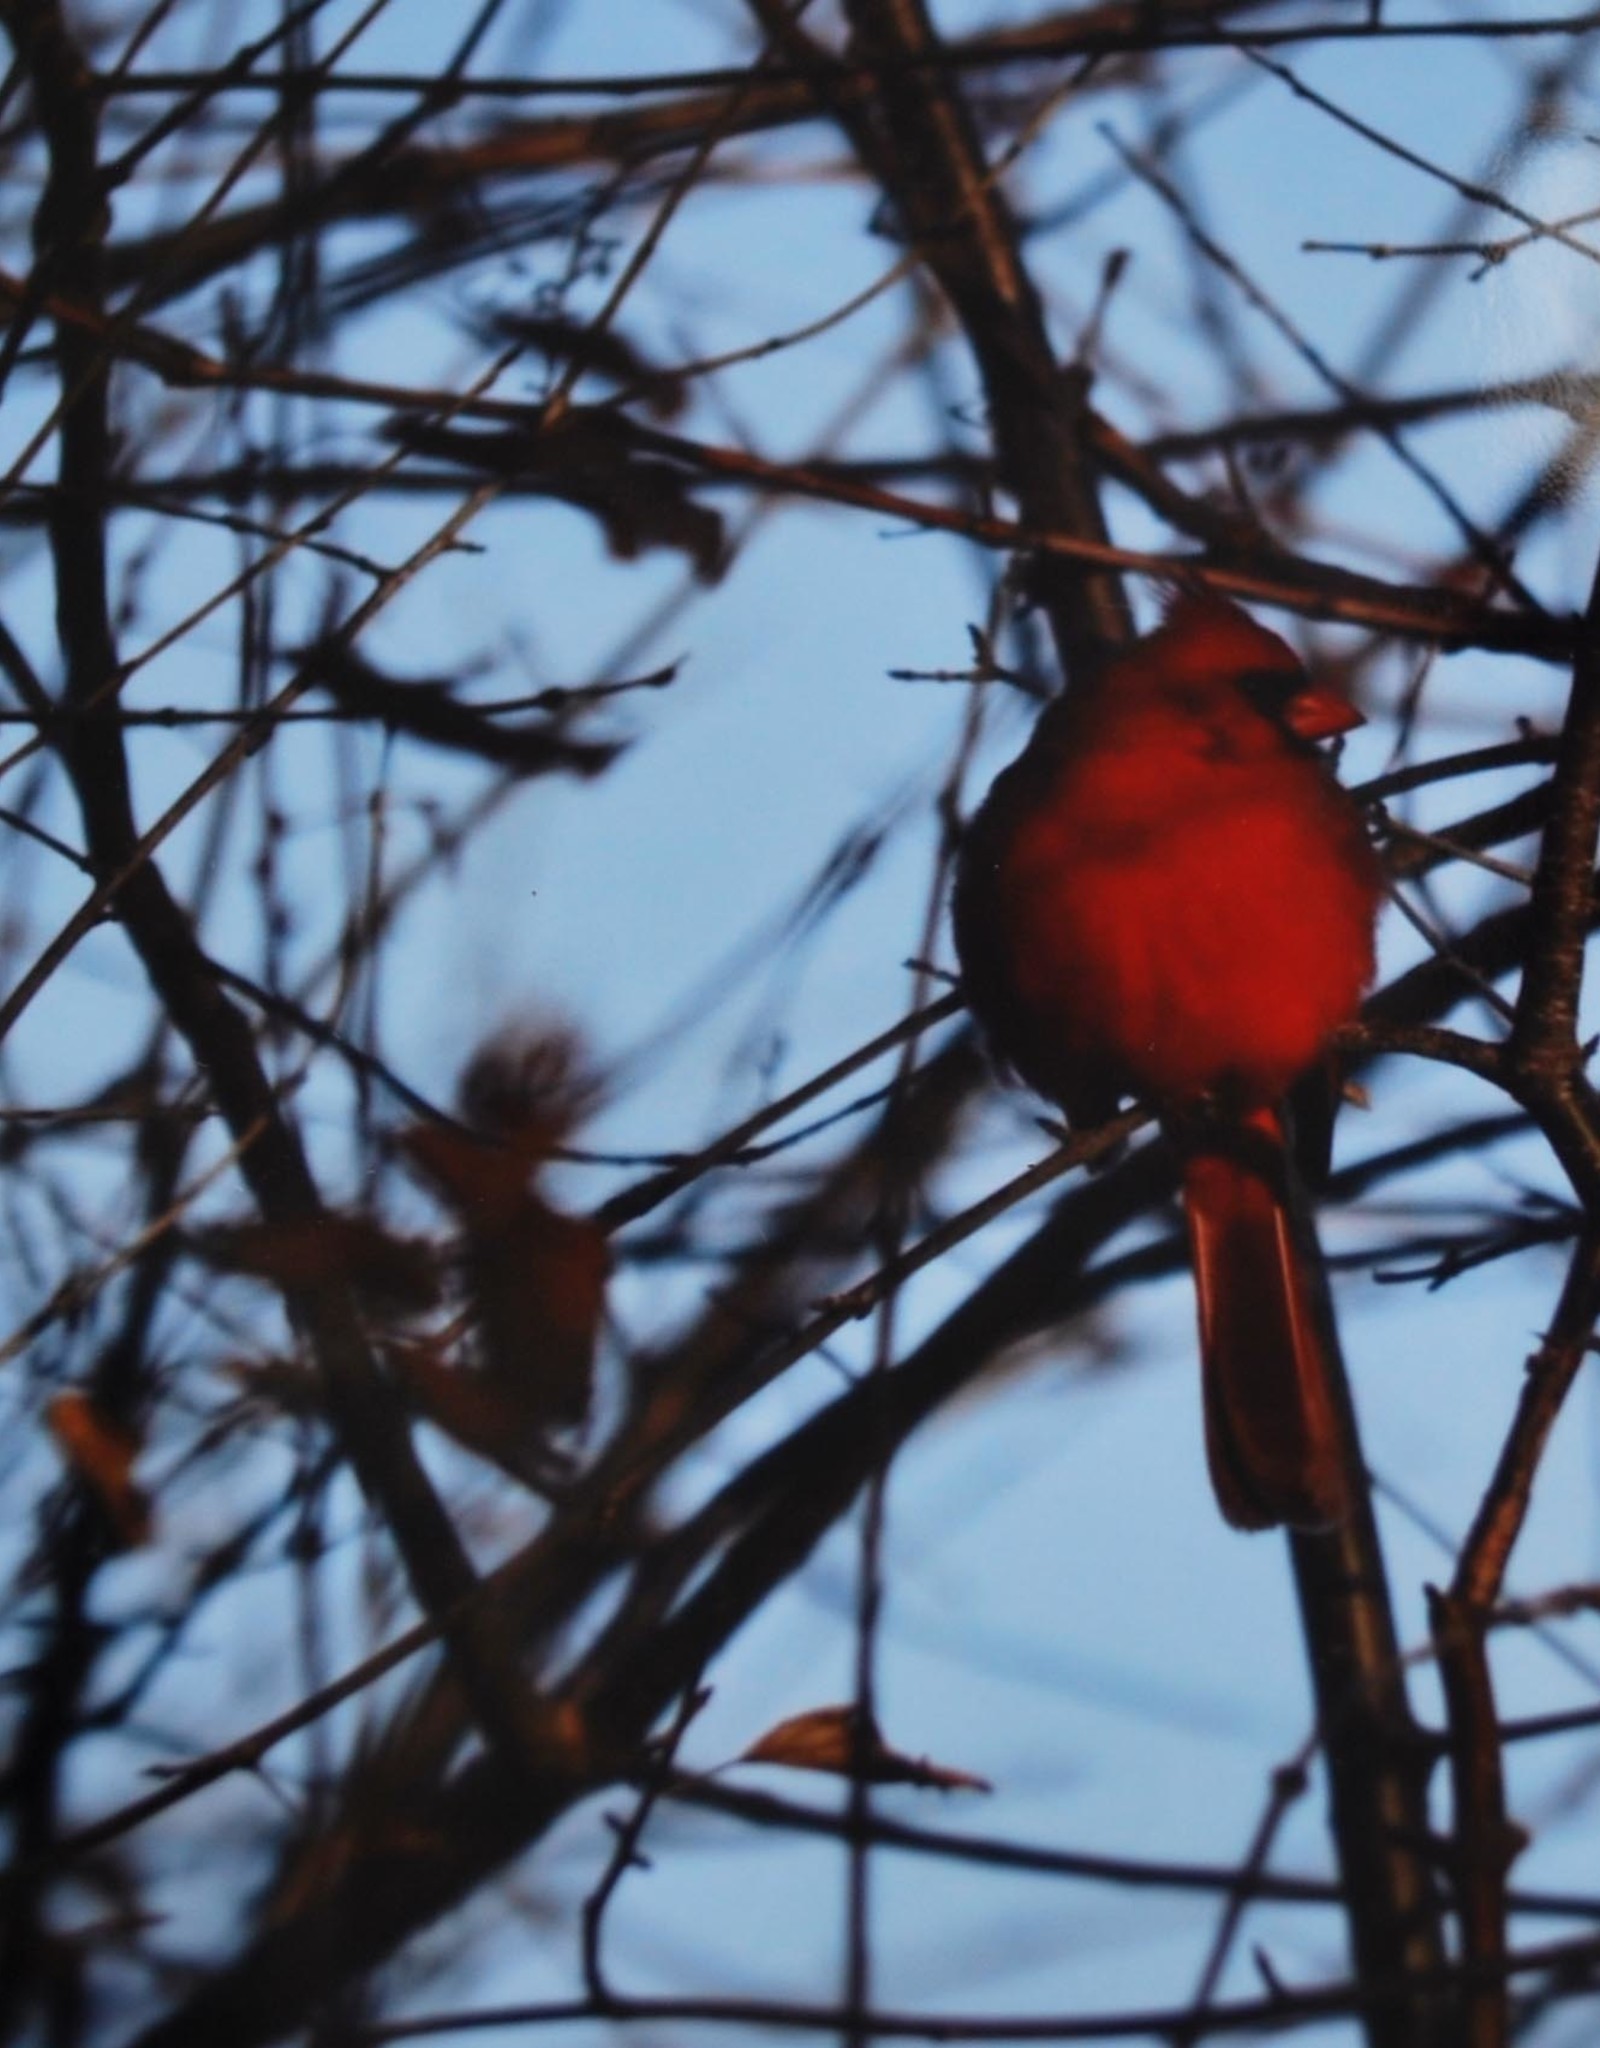 Daria Percy Matted “Cardinal” 5x7 photograph by Daria Percy